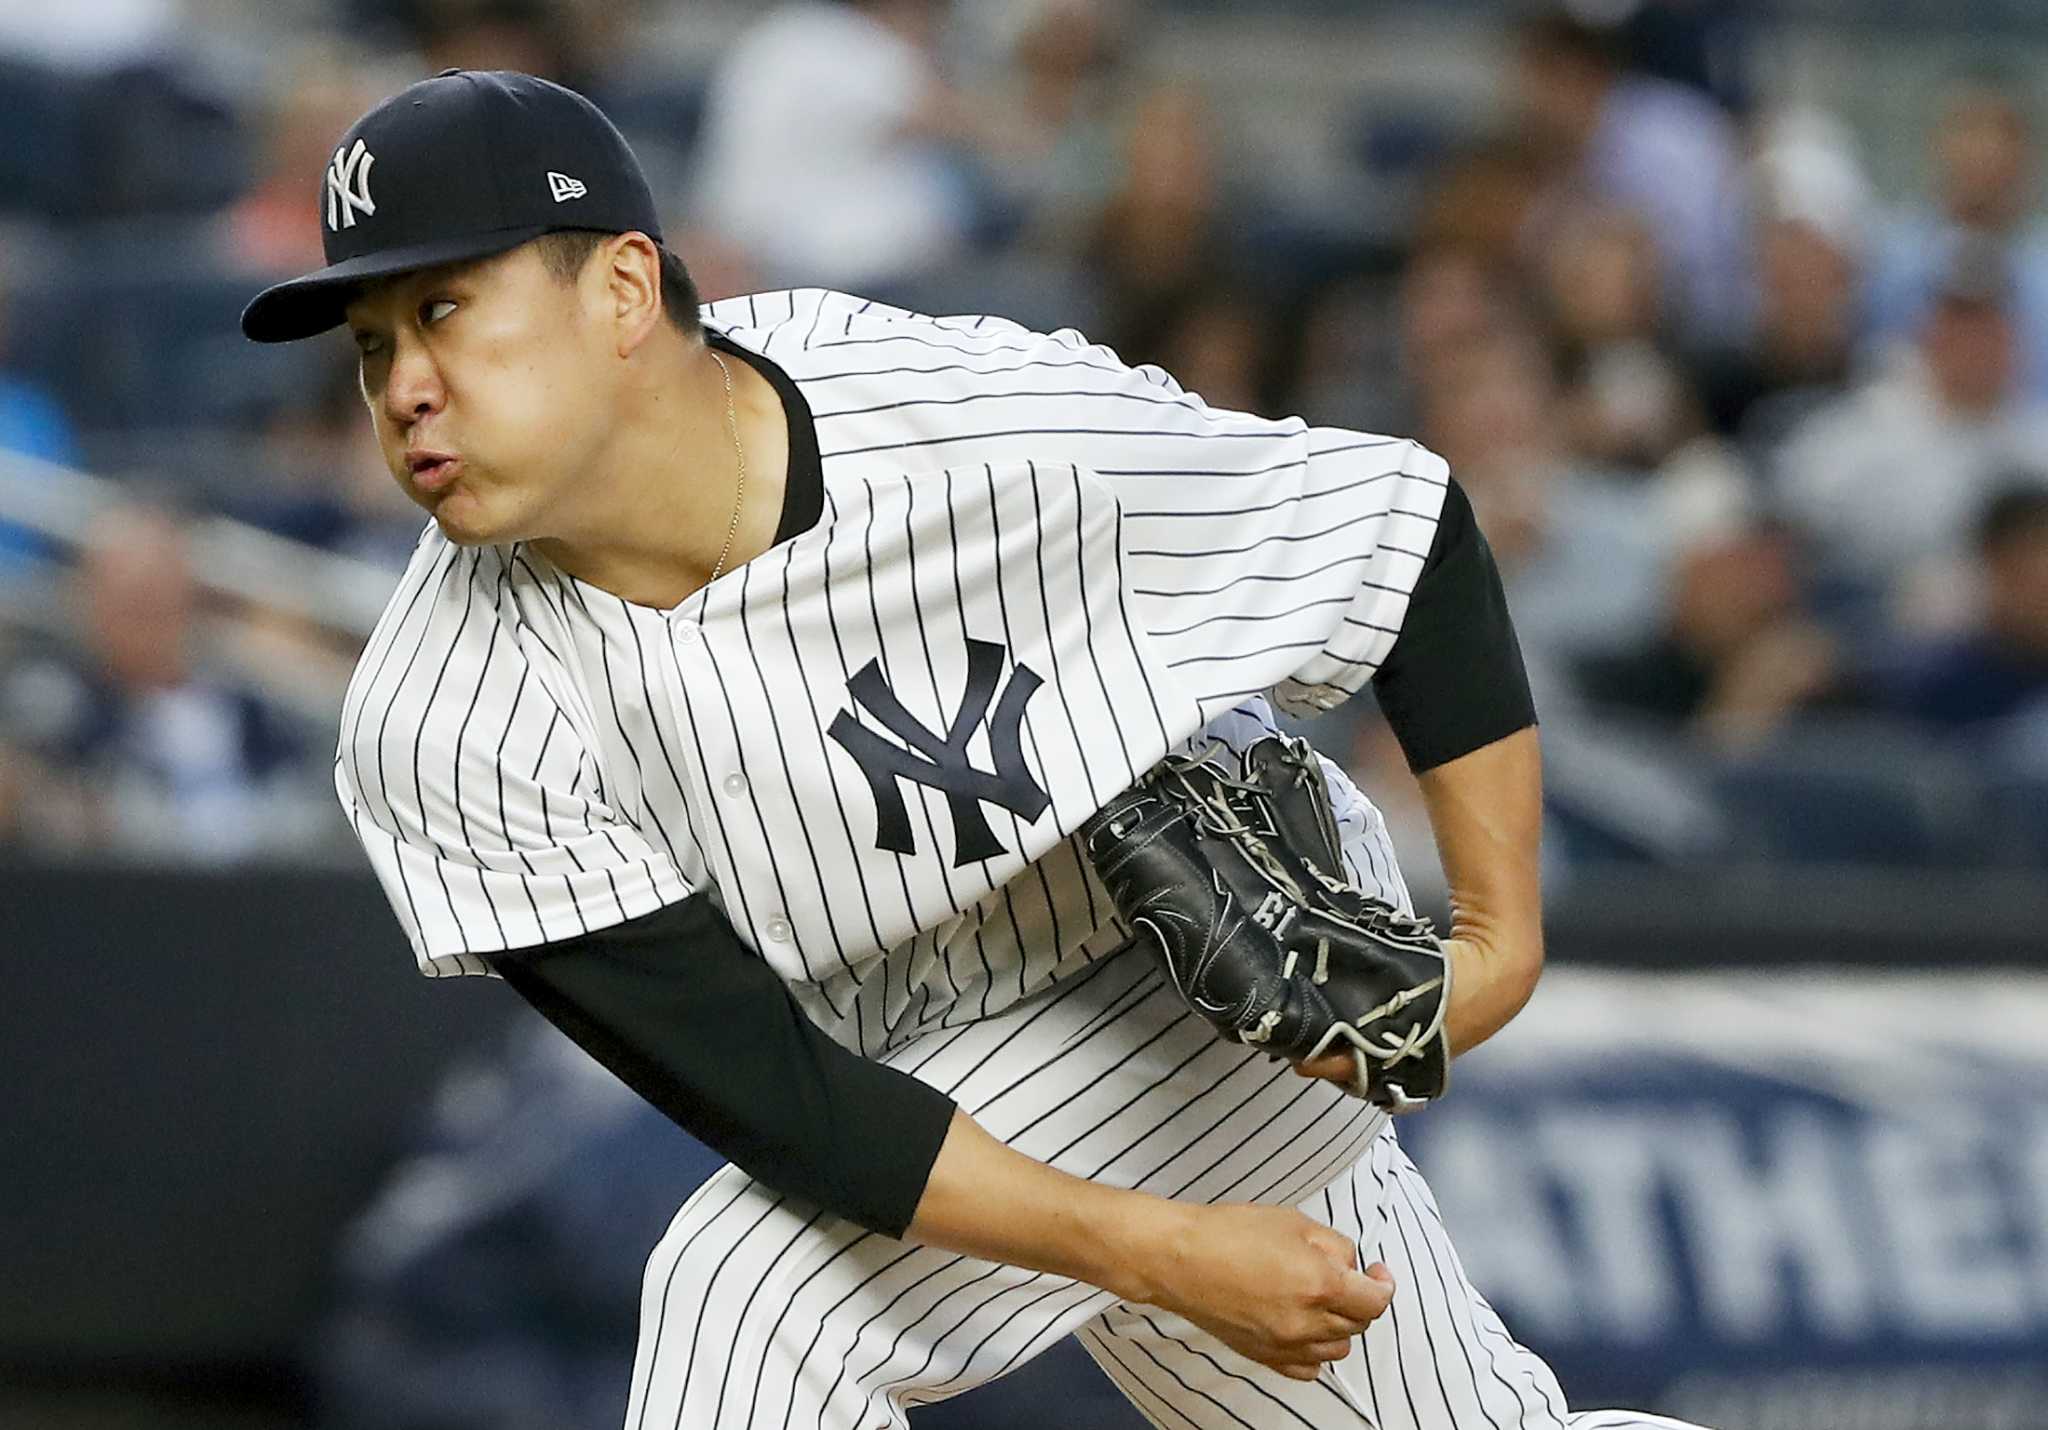 Yankees down Rays, take over top spot in AL East